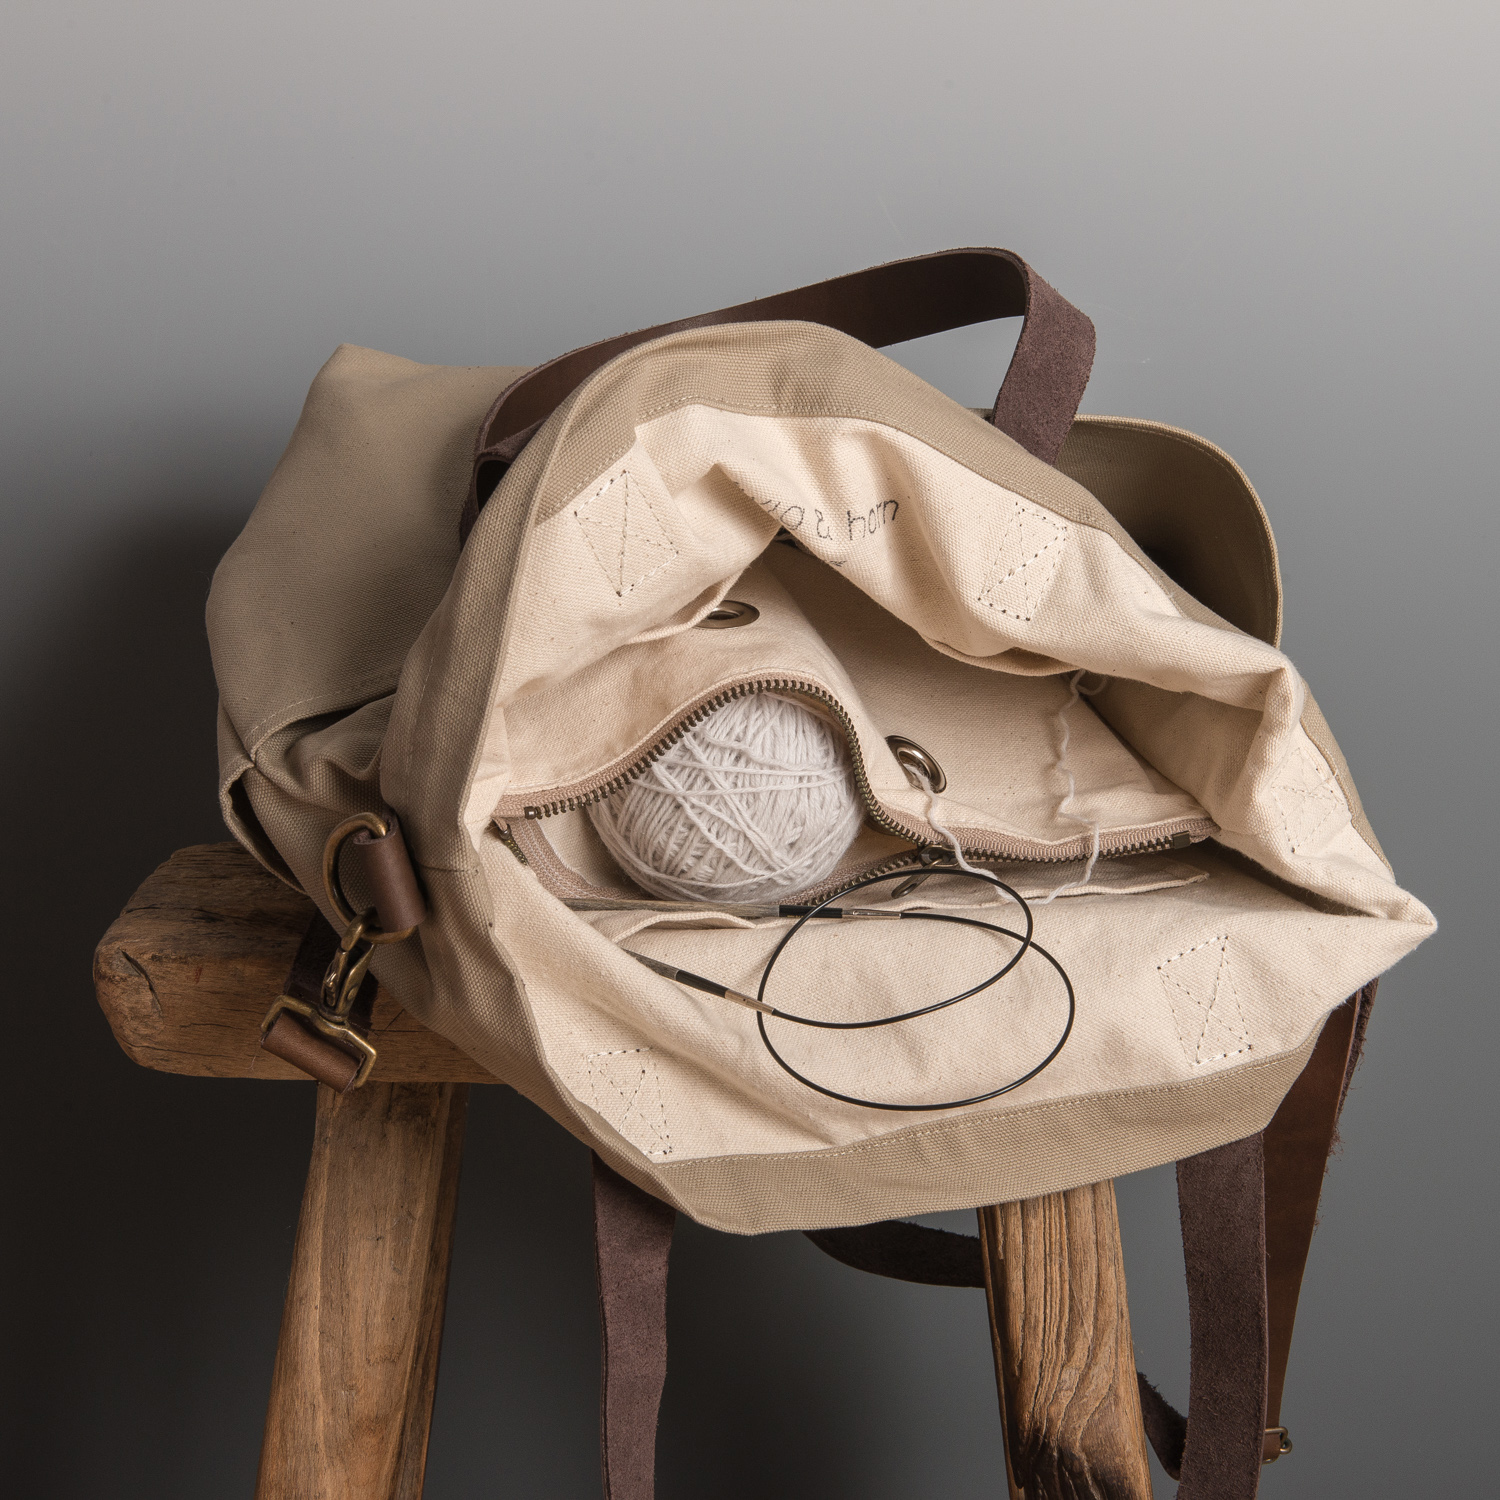 CANVAS CROSSBODY TOTE BAG - Twig and Horn